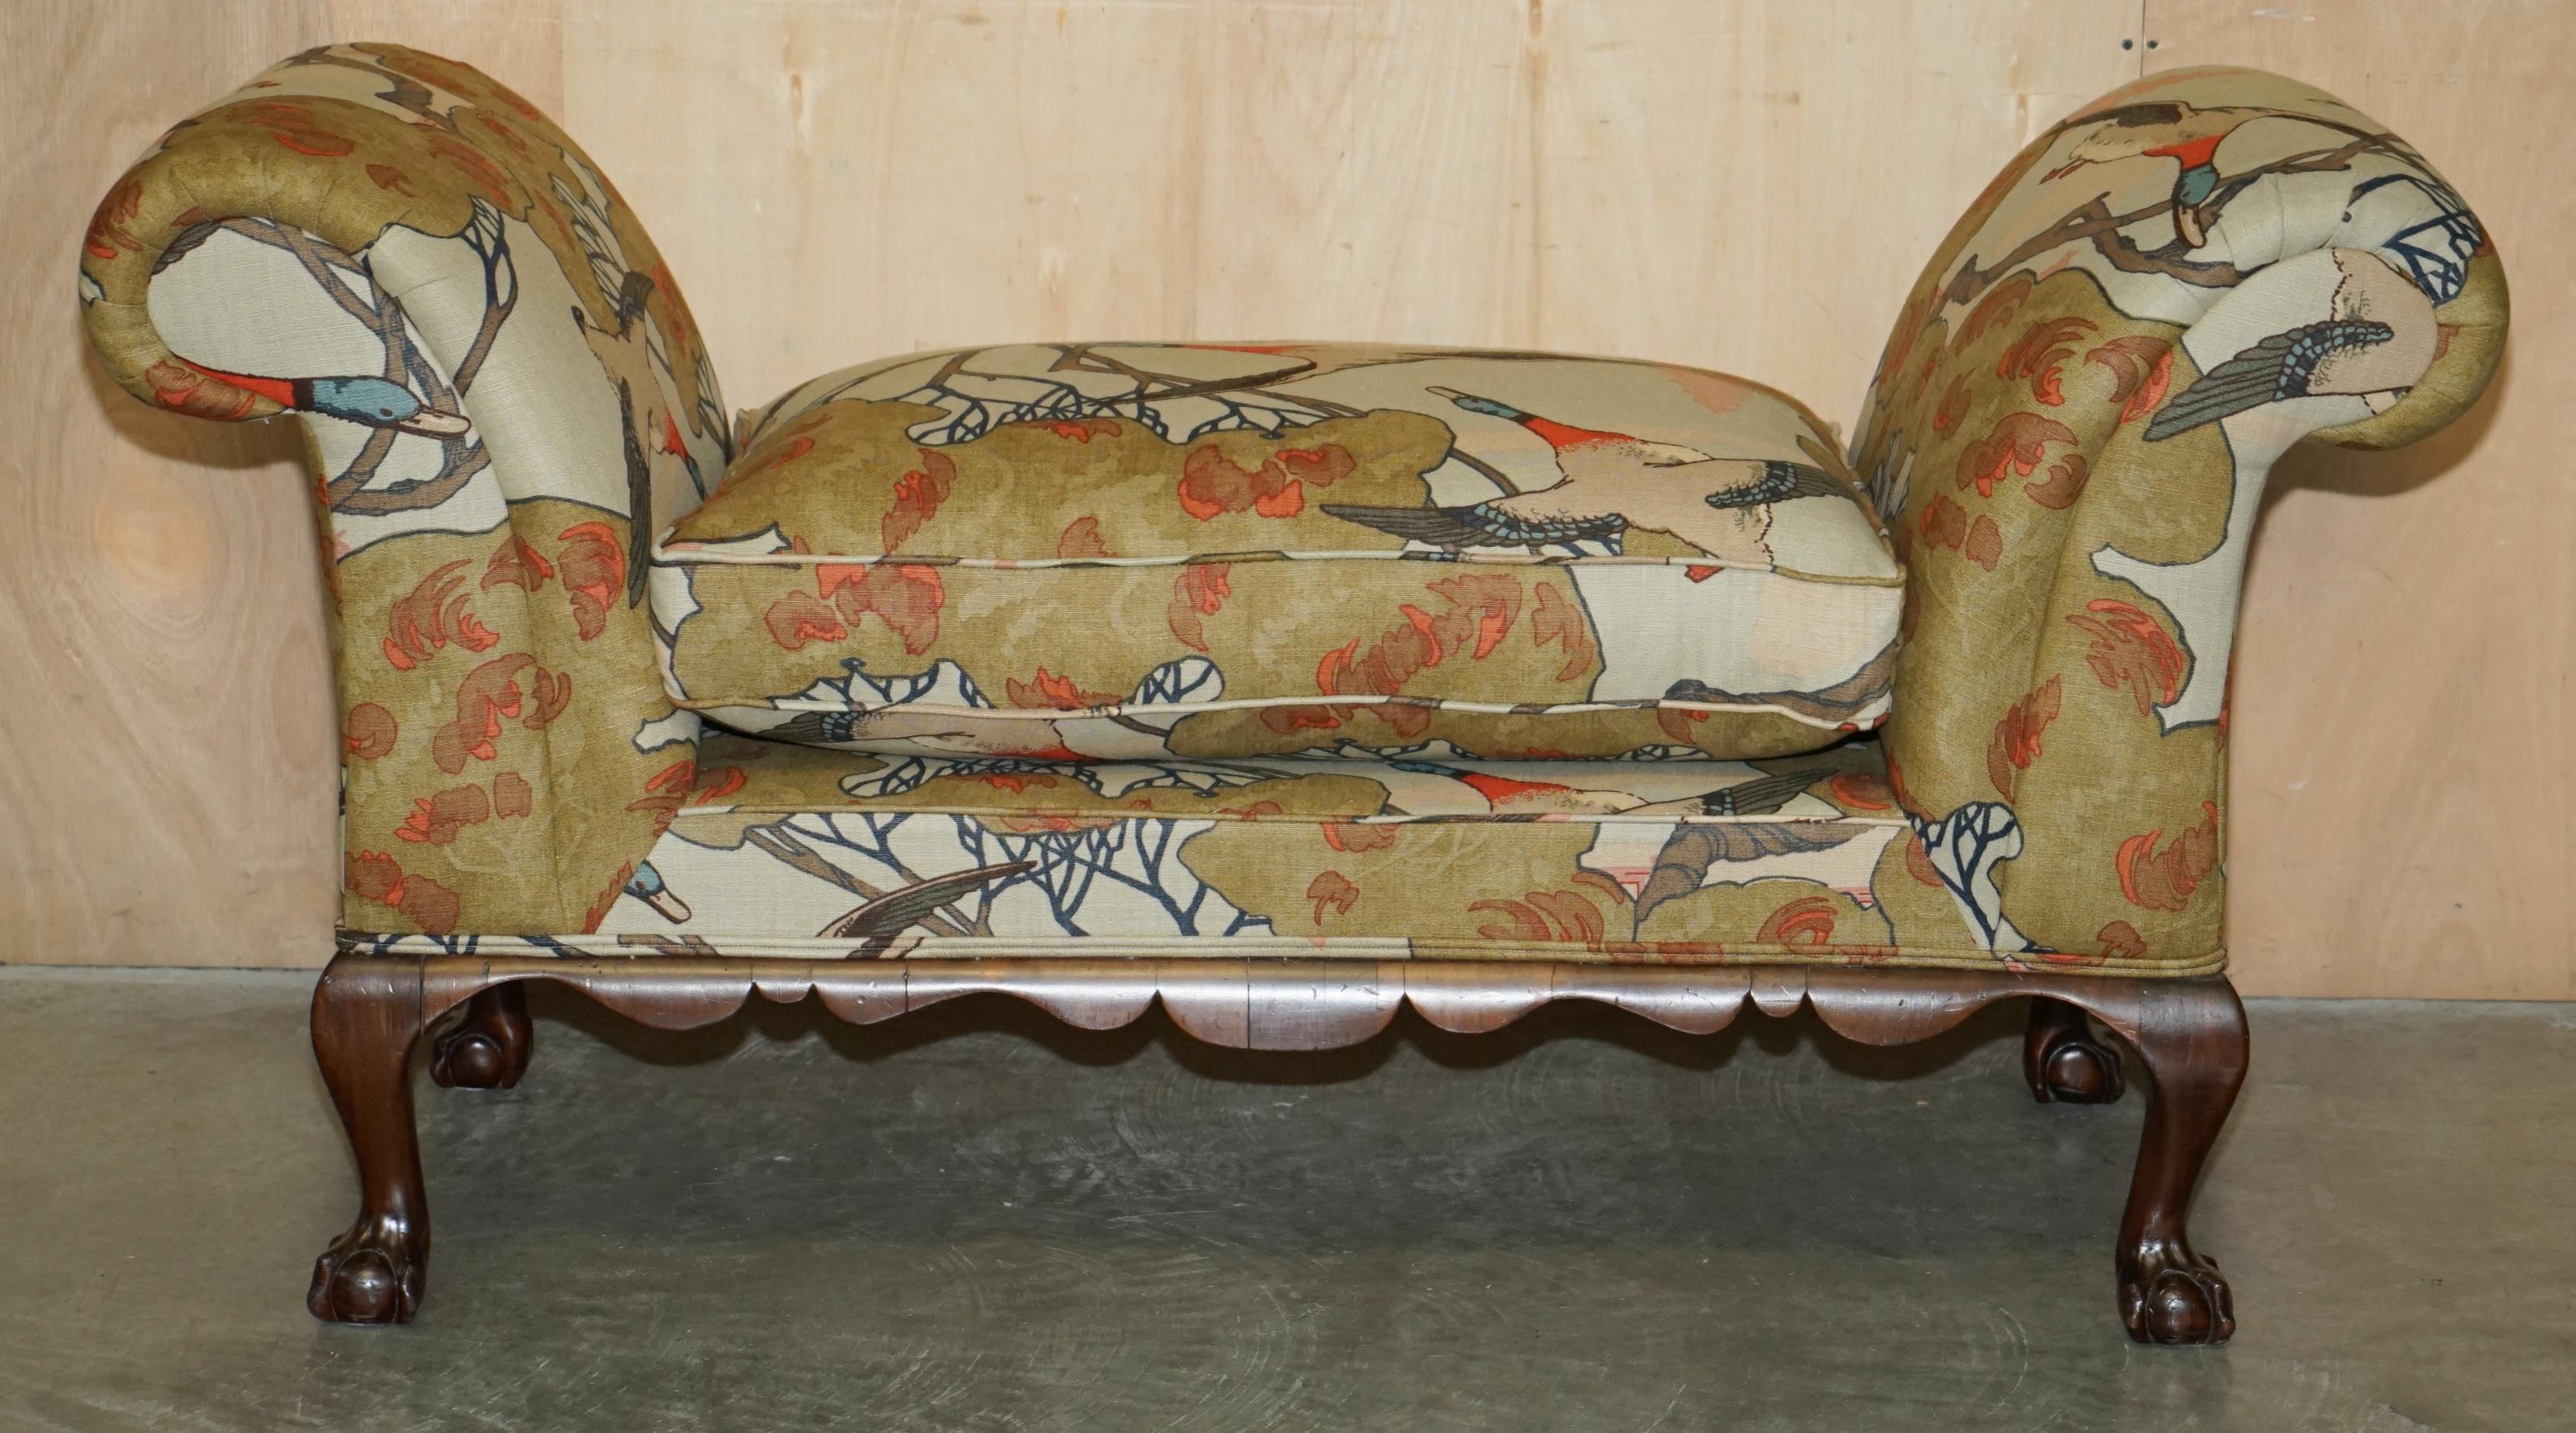 ANTIQUE CLAW & BALL FOOT HALL BENCH WiNDOW SEAT IN MULBERRY FLYING DUCK S FABRIC For Sale 13